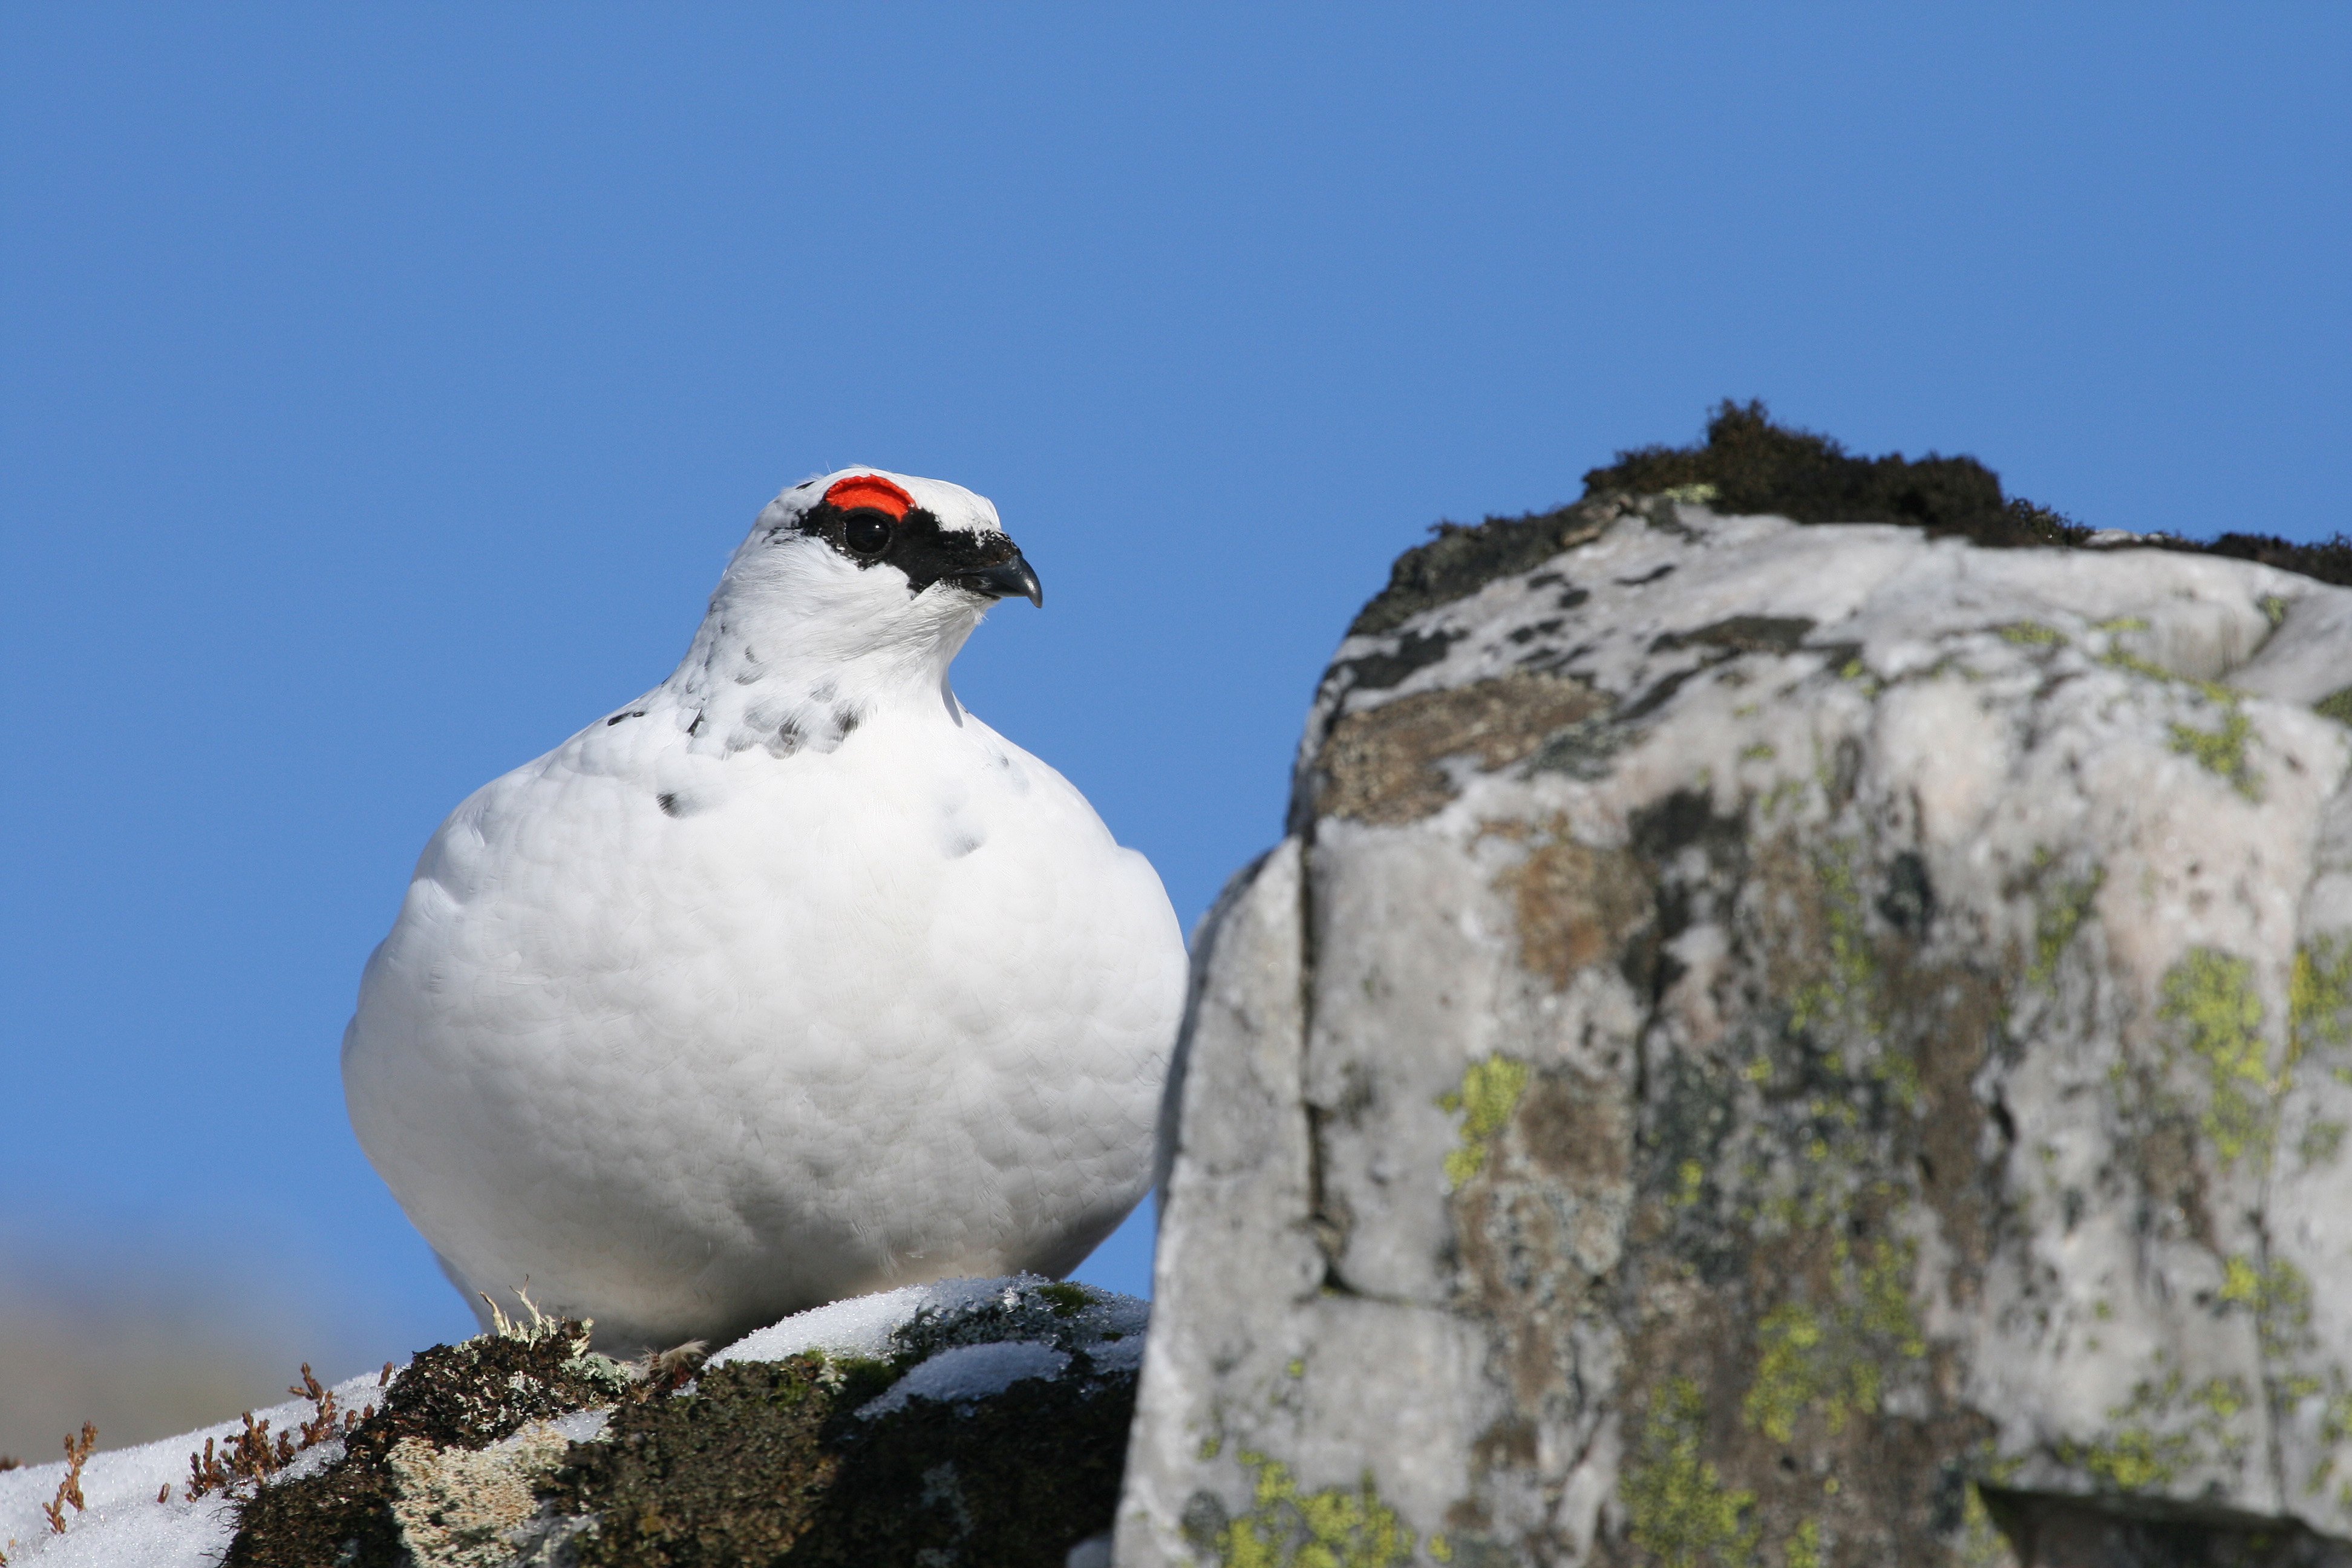 Male ptarmigan showing its winter plumage in Cairngorms National Park in the Scottish Highlands 